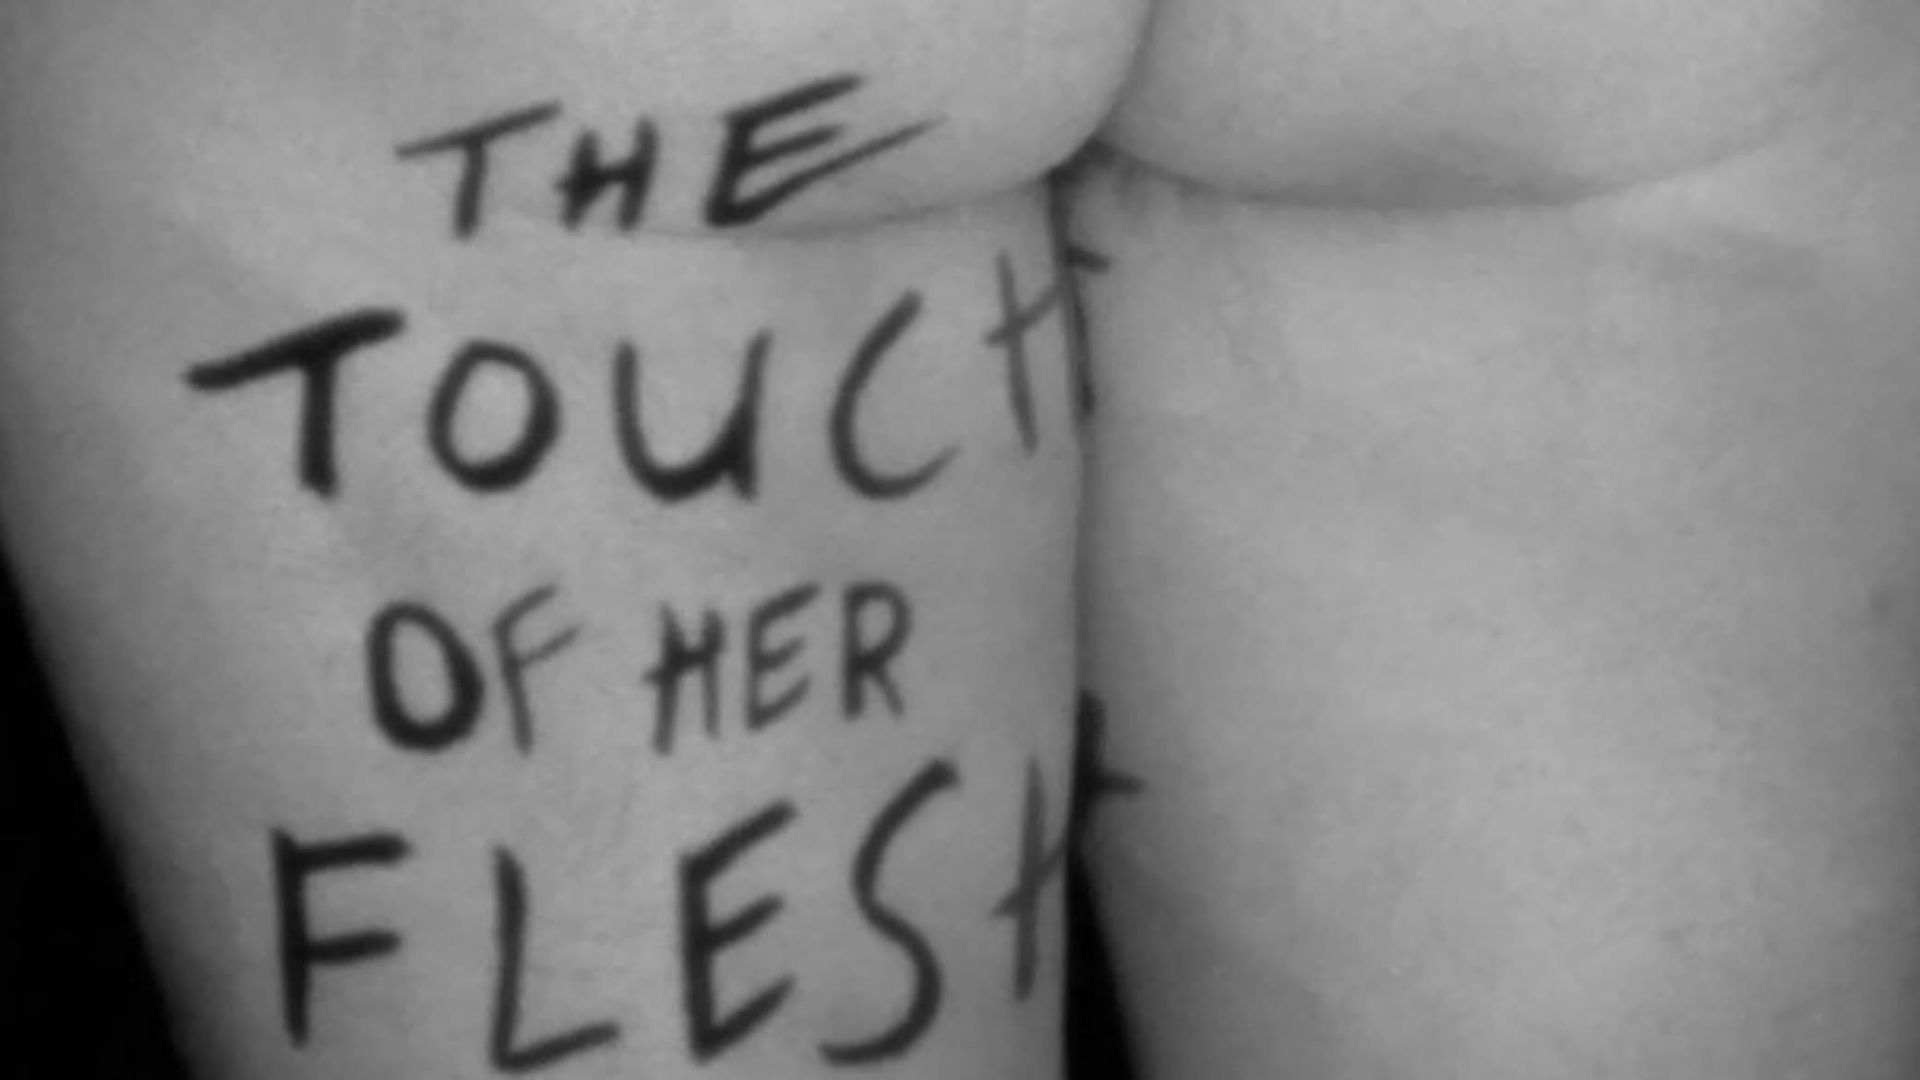 The Touch of Her Flesh background